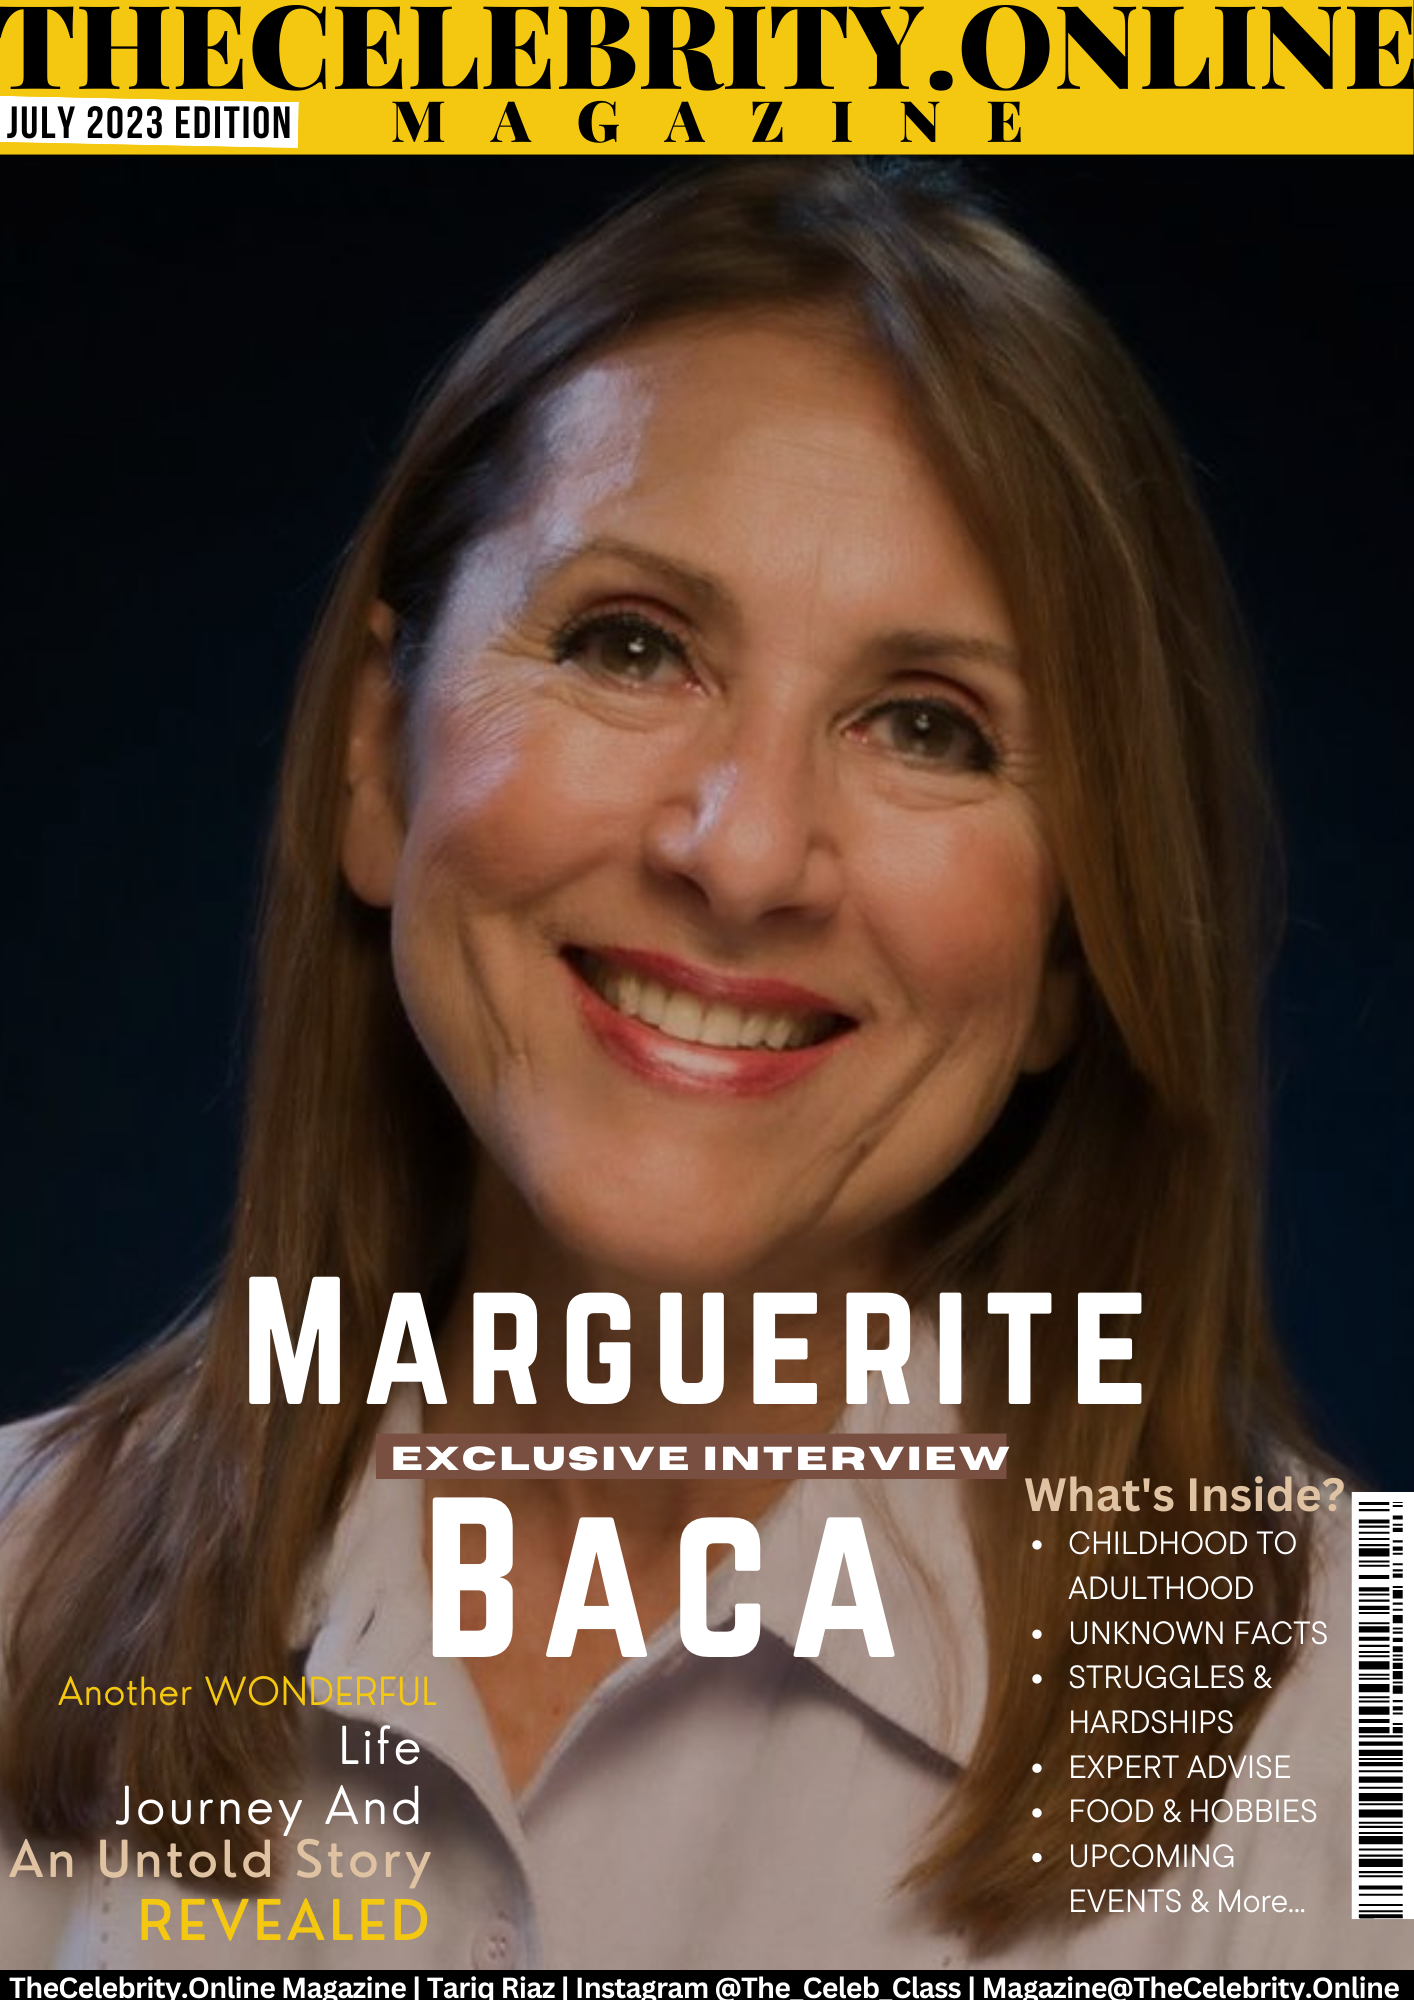 Marguerite Baca Exclusive Interview – ‘Conscious Breathing Will Penetrate Through Layers Of Pain’